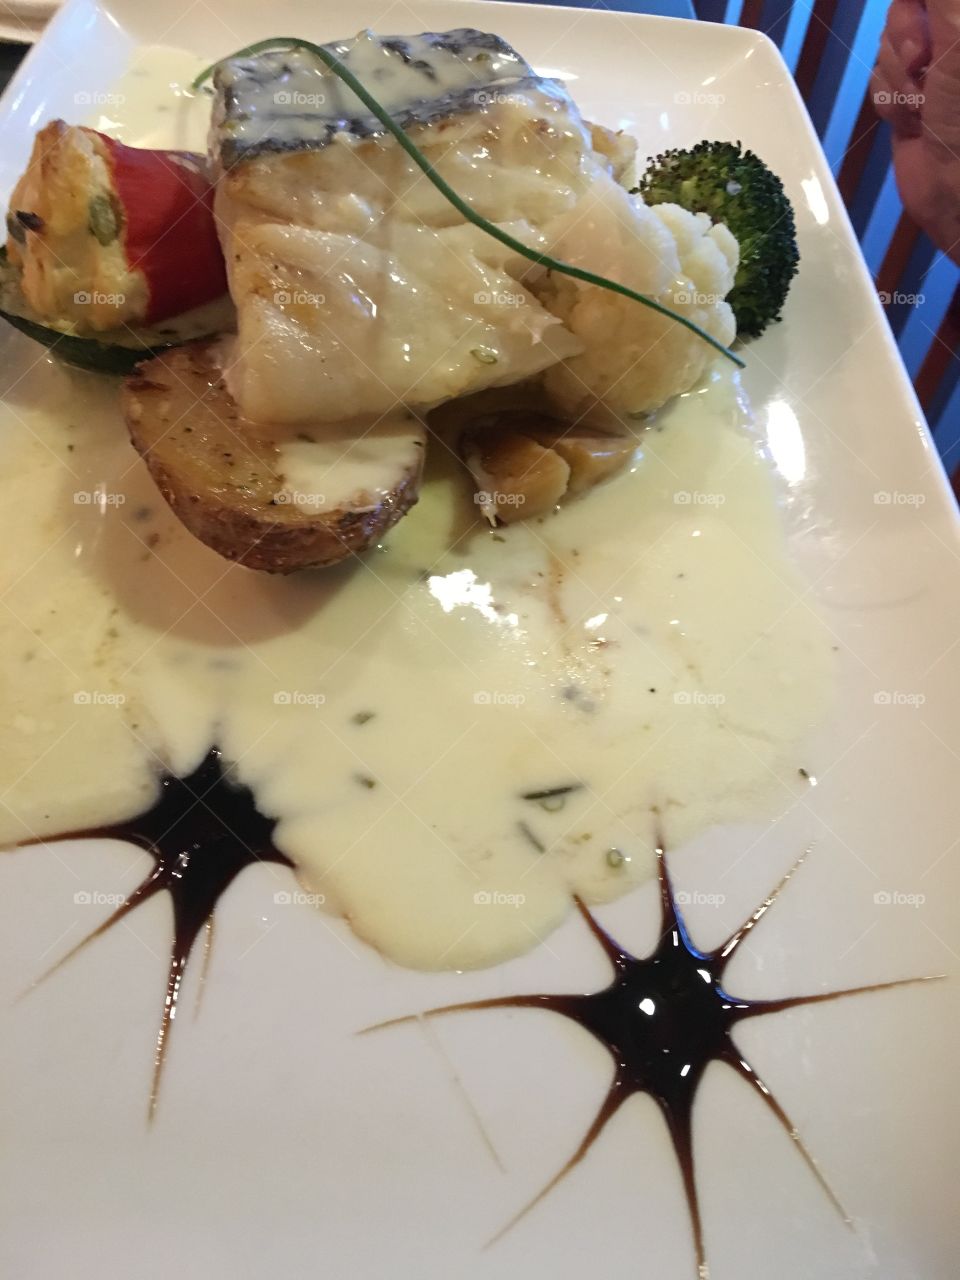 Baked cod with potato and broccoli in a champagne sauce.